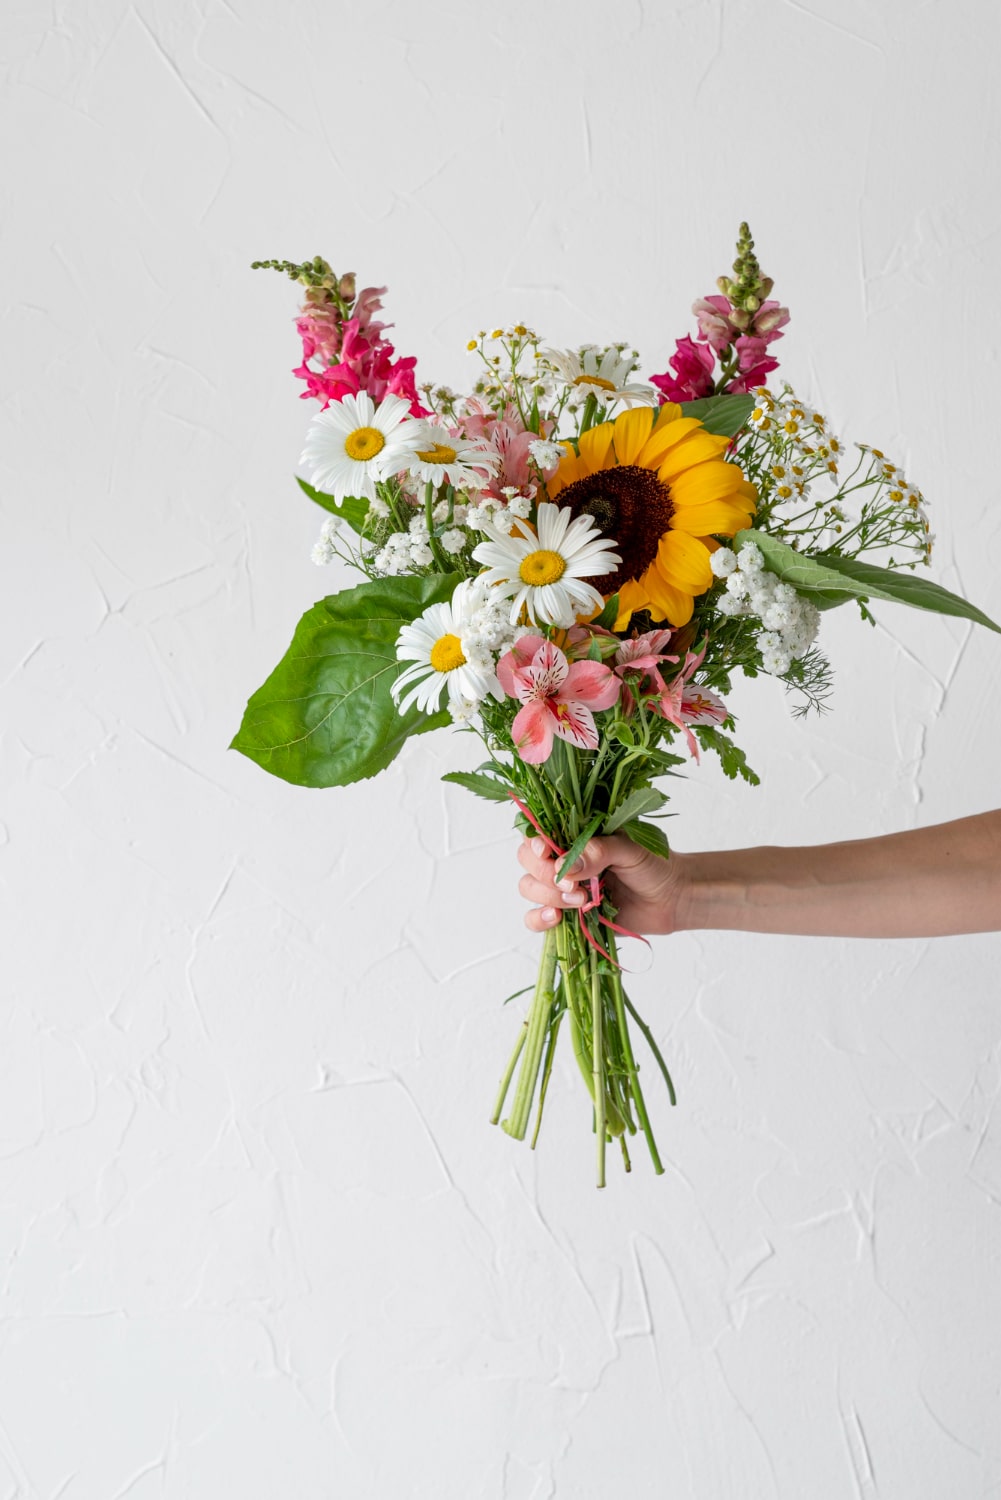 , Top Reasons To Buy Flowers From Your Local Florist, Days of a Domestic Dad